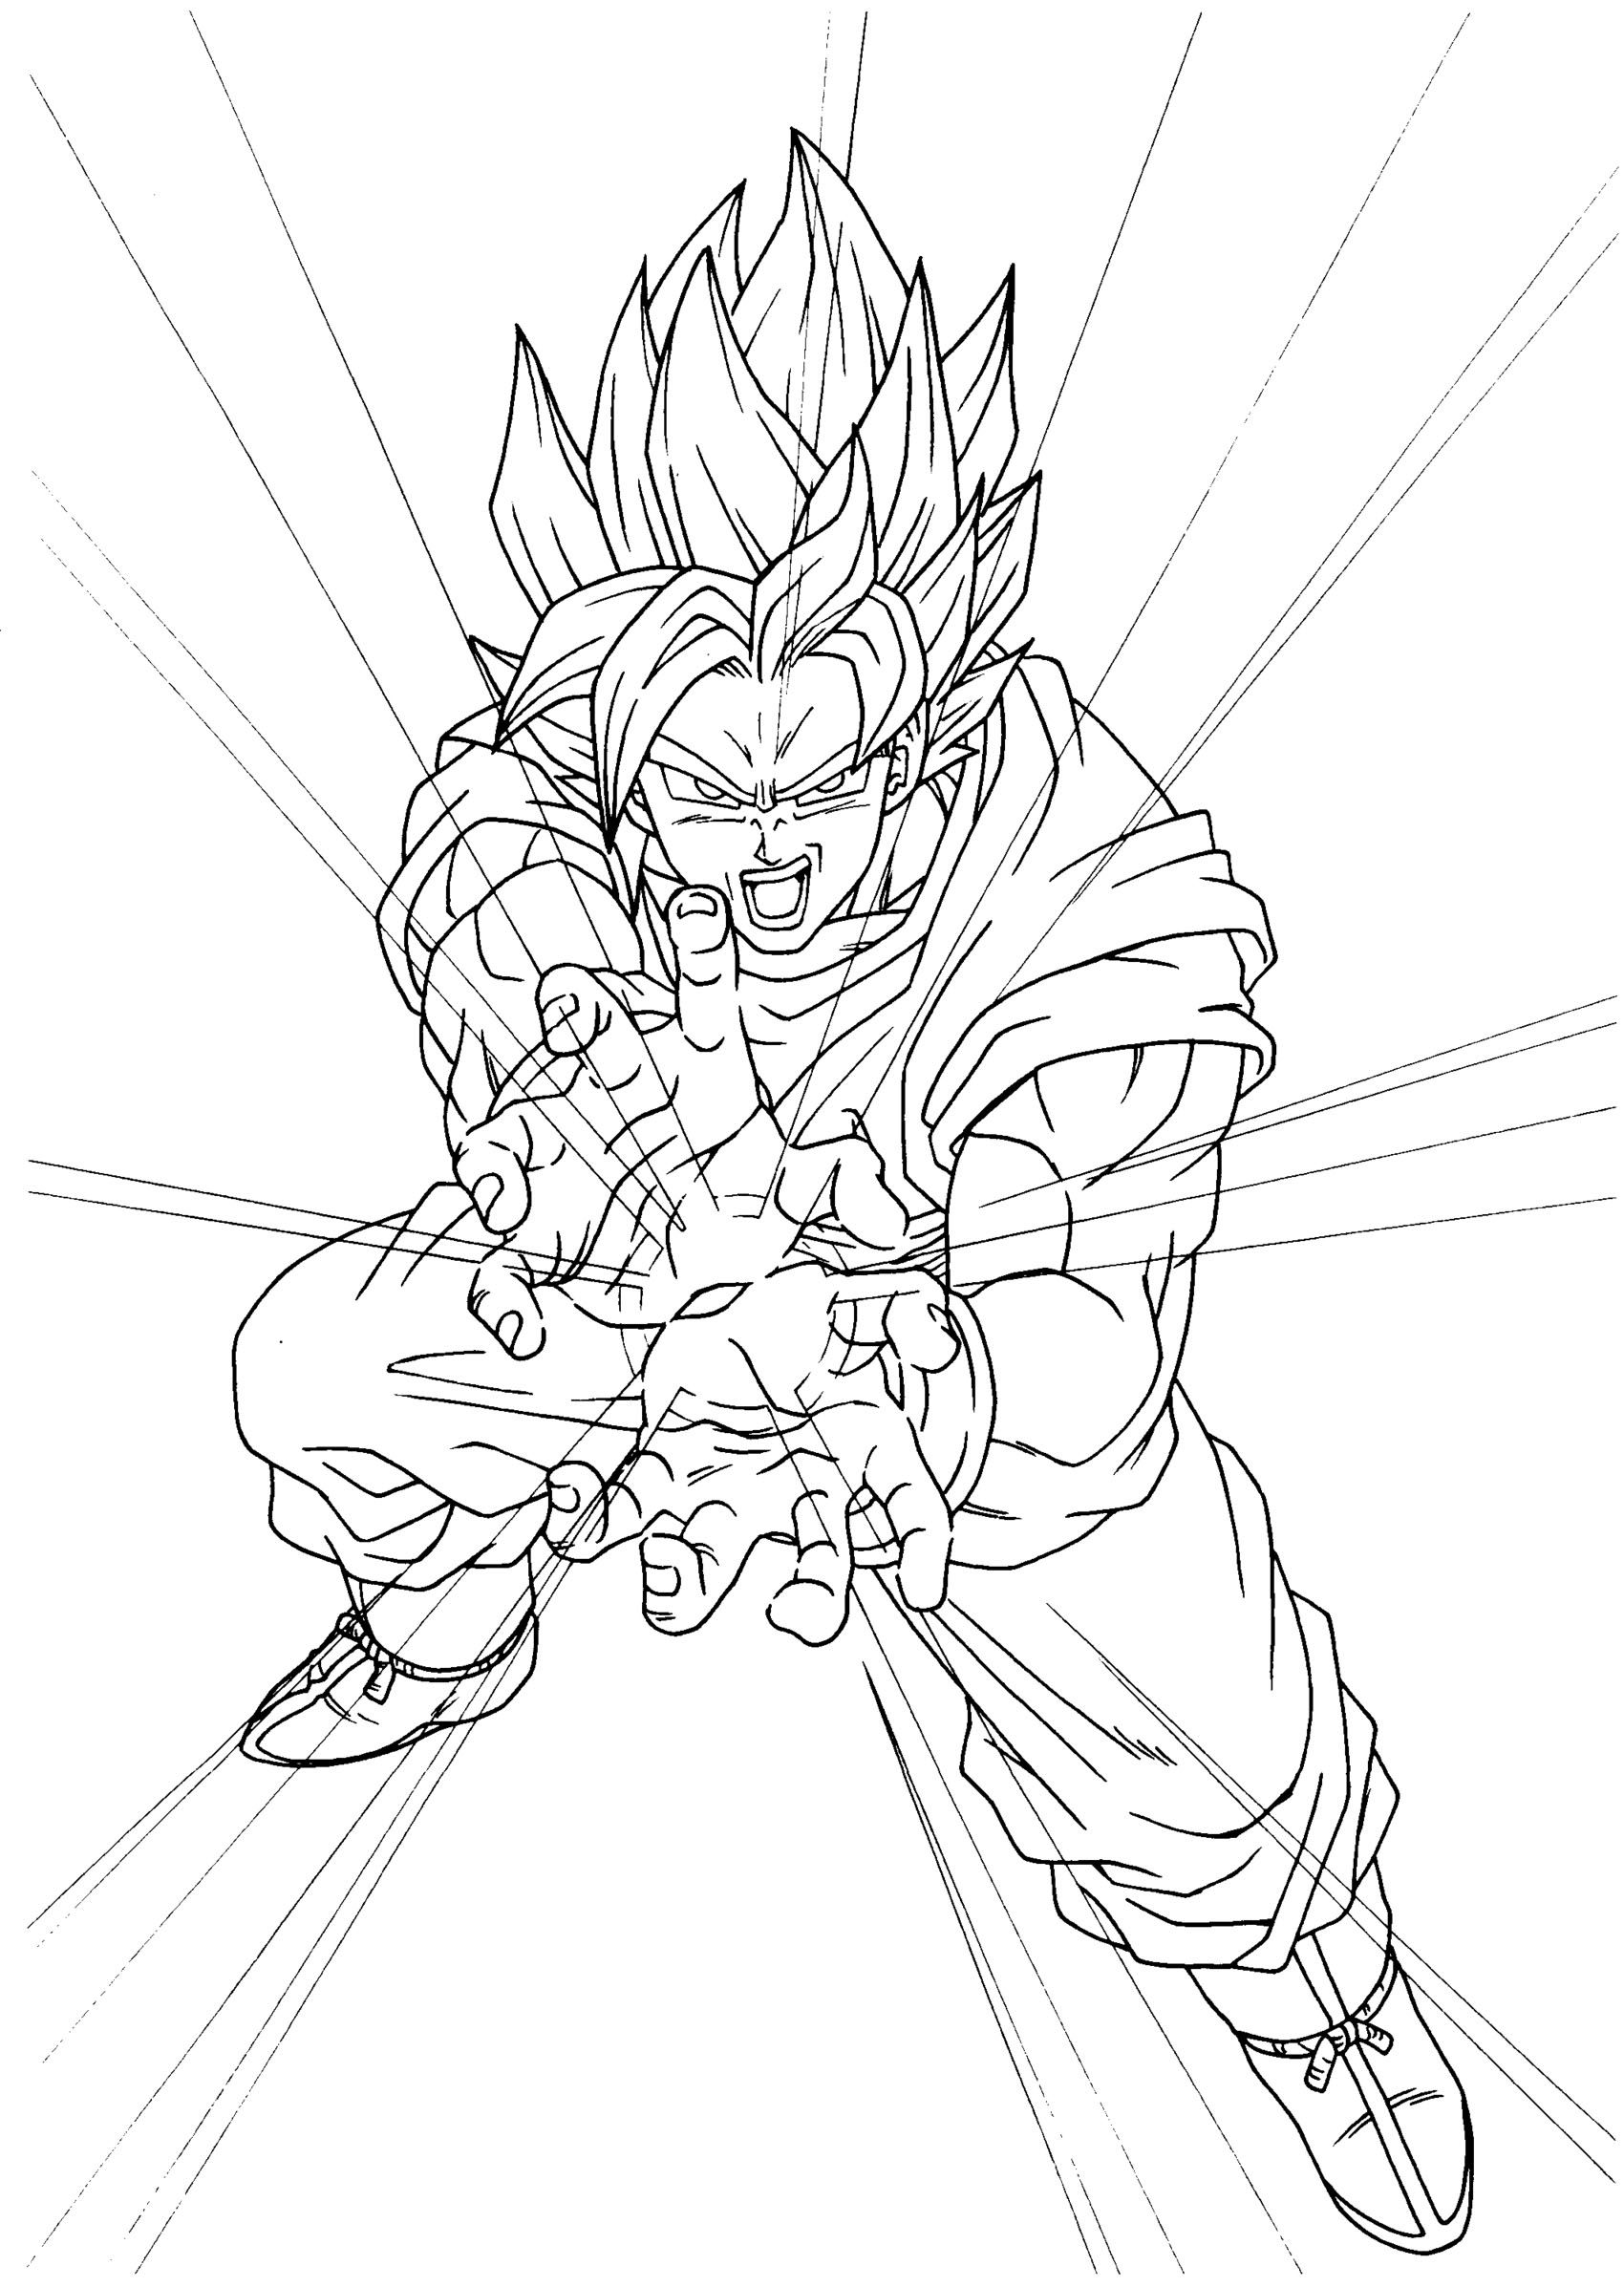 Funny Dragon Ball Z coloring page for kids : Songoku